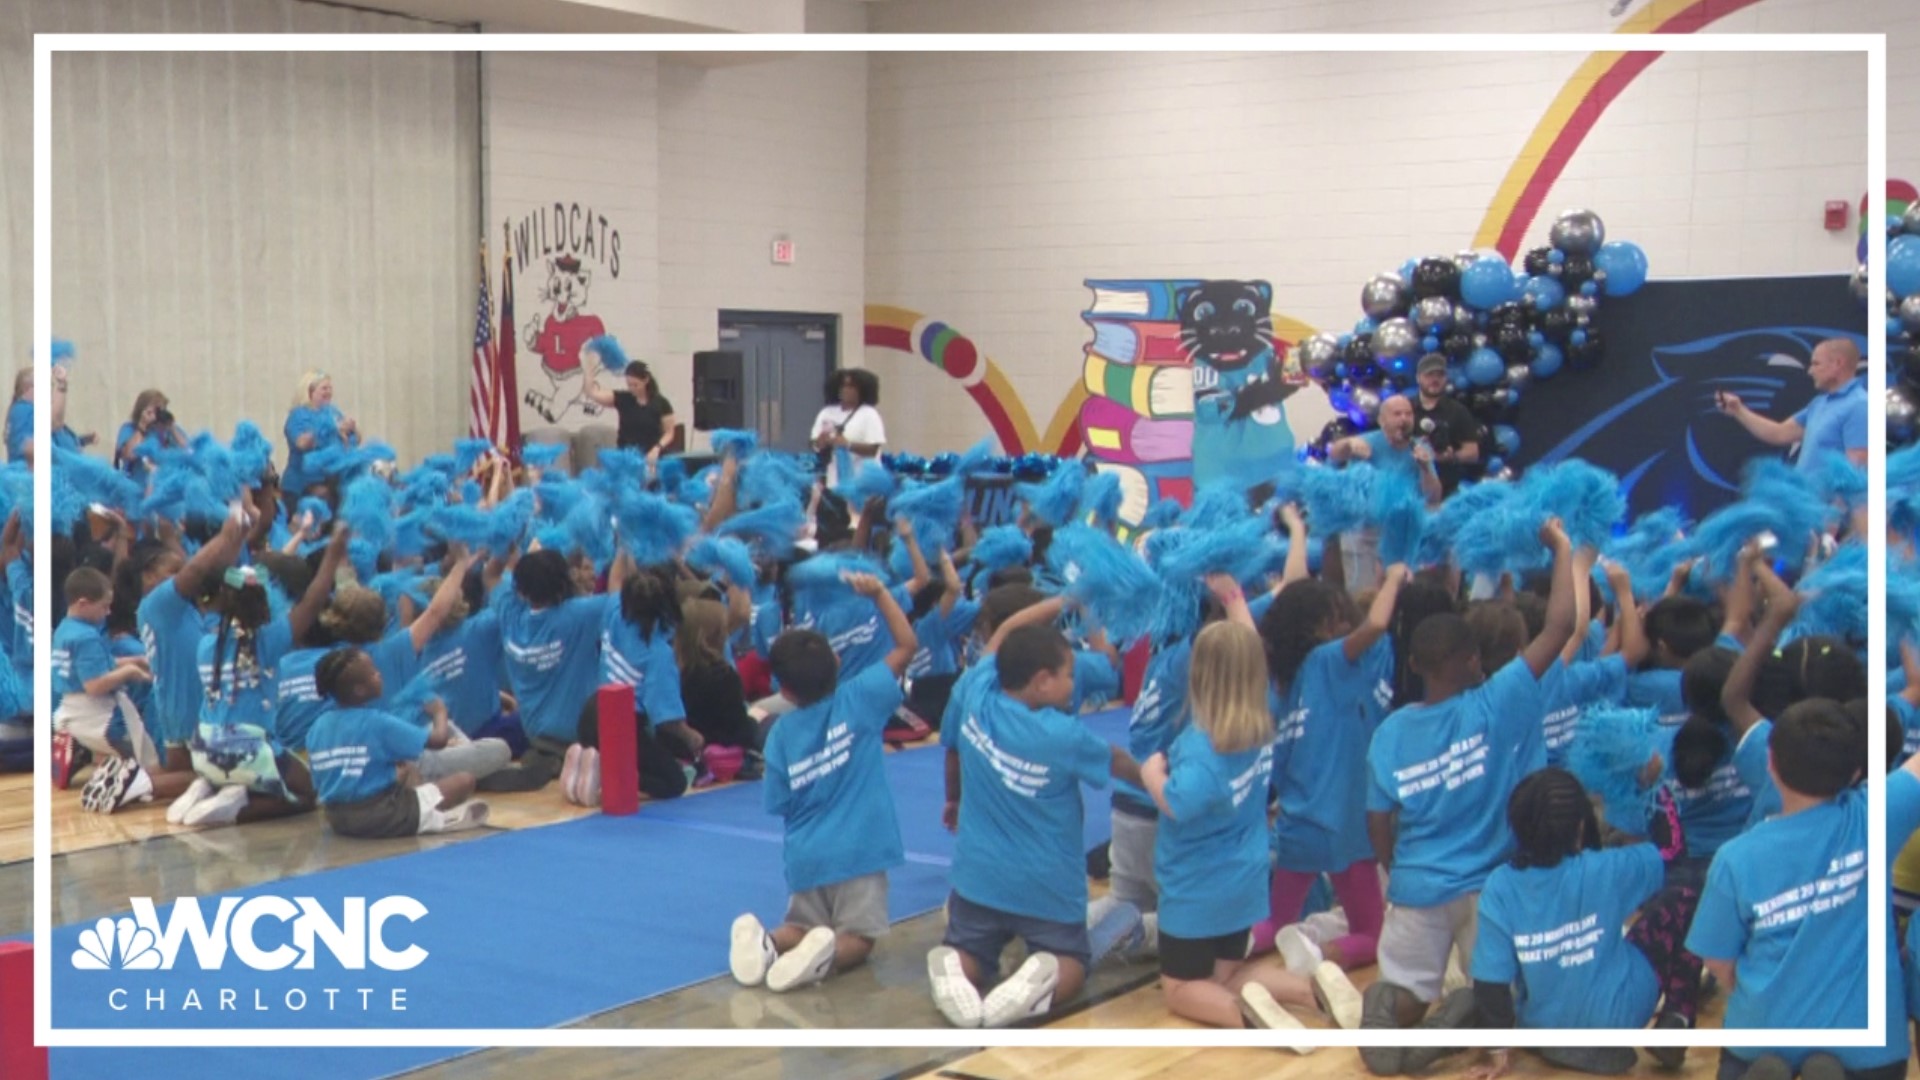 The team capped off a school supply giveaway at a Gaston County elementary school Thursday.